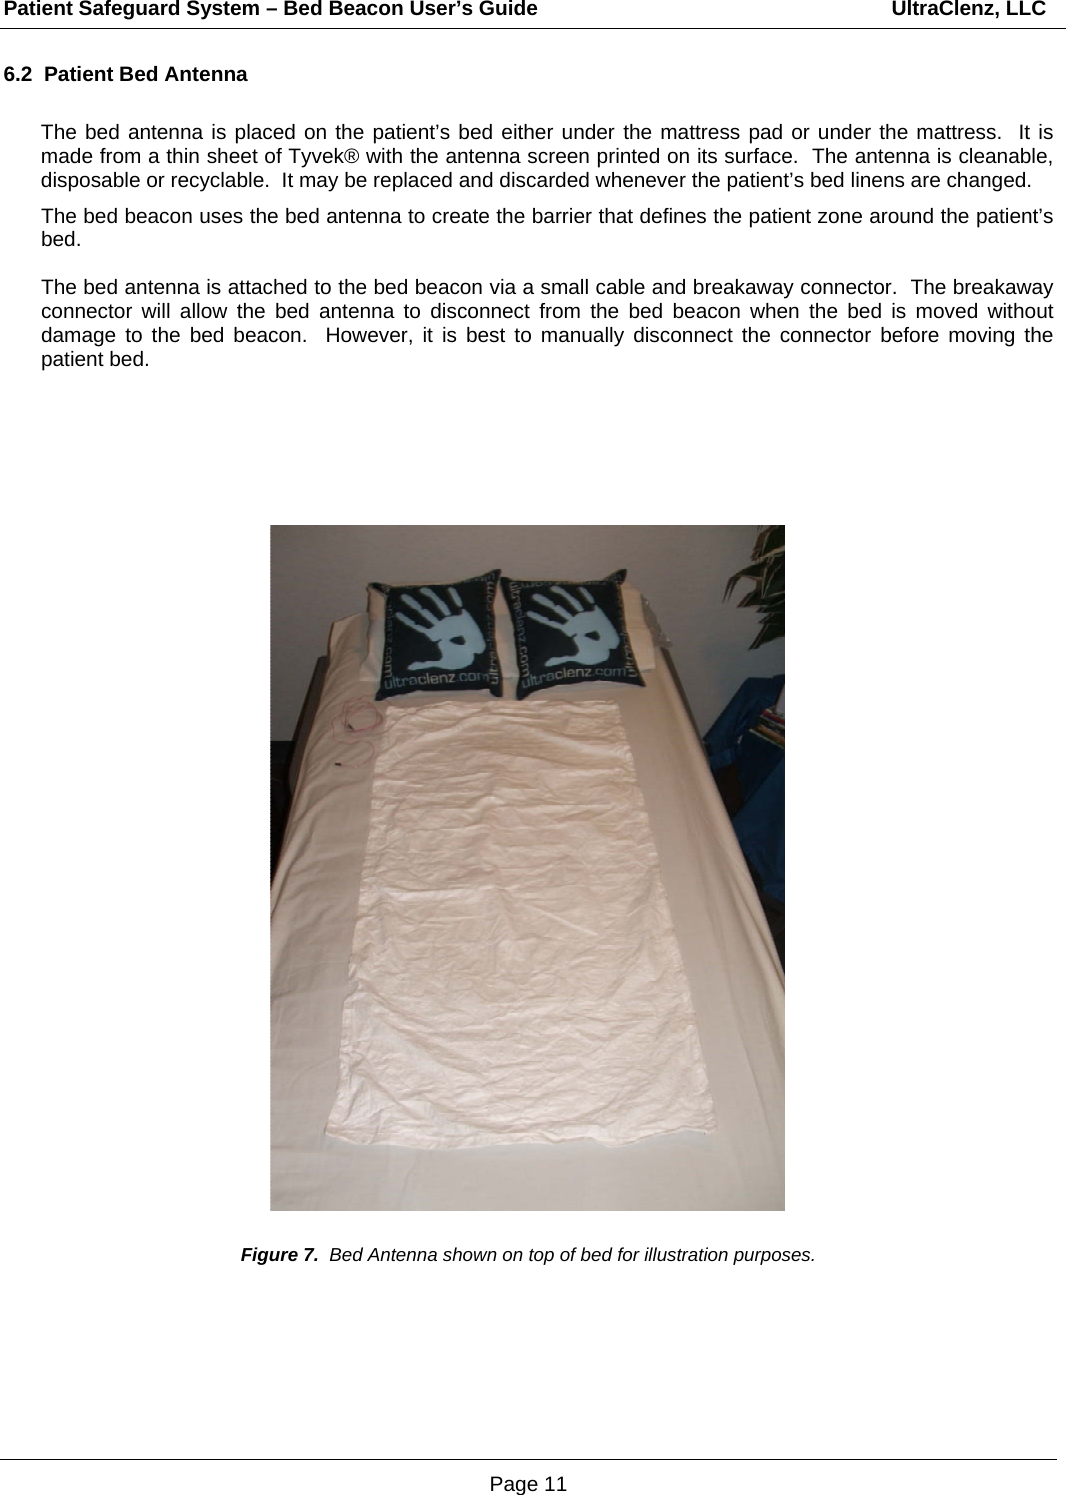 Patient Safeguard System – Bed Beacon User’s Guide                                                             UltraClenz, LLC Page 11 6.2  Patient Bed Antenna  The bed antenna is placed on the patient’s bed either under the mattress pad or under the mattress.  It is made from a thin sheet of Tyvek® with the antenna screen printed on its surface.  The antenna is cleanable, disposable or recyclable.  It may be replaced and discarded whenever the patient’s bed linens are changed.  The bed beacon uses the bed antenna to create the barrier that defines the patient zone around the patient’s bed.    The bed antenna is attached to the bed beacon via a small cable and breakaway connector.  The breakaway connector will allow the bed antenna to disconnect from the bed beacon when the bed is moved without damage to the bed beacon.  However, it is best to manually disconnect the connector before moving the patient bed.                                            Figure 7.  Bed Antenna shown on top of bed for illustration purposes. 